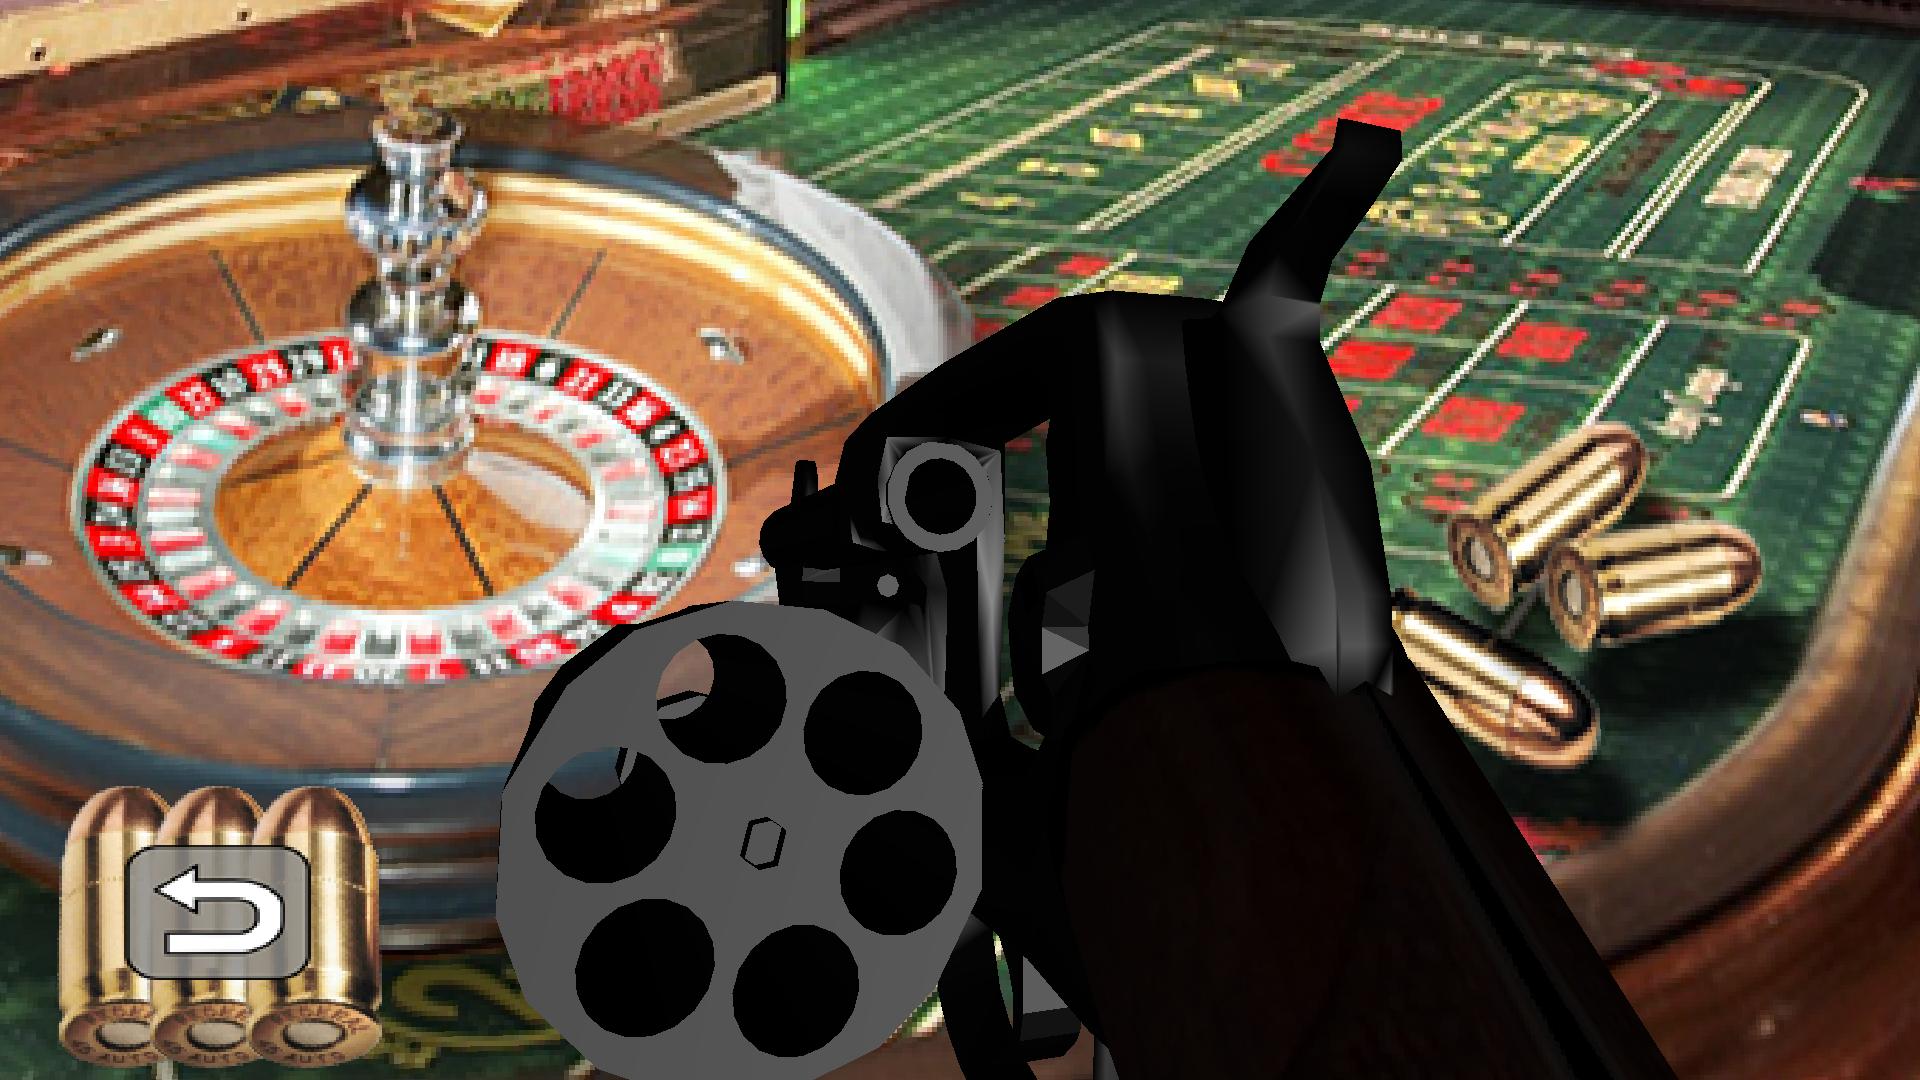 Download do APK de Russian Roulette: One Life para Android